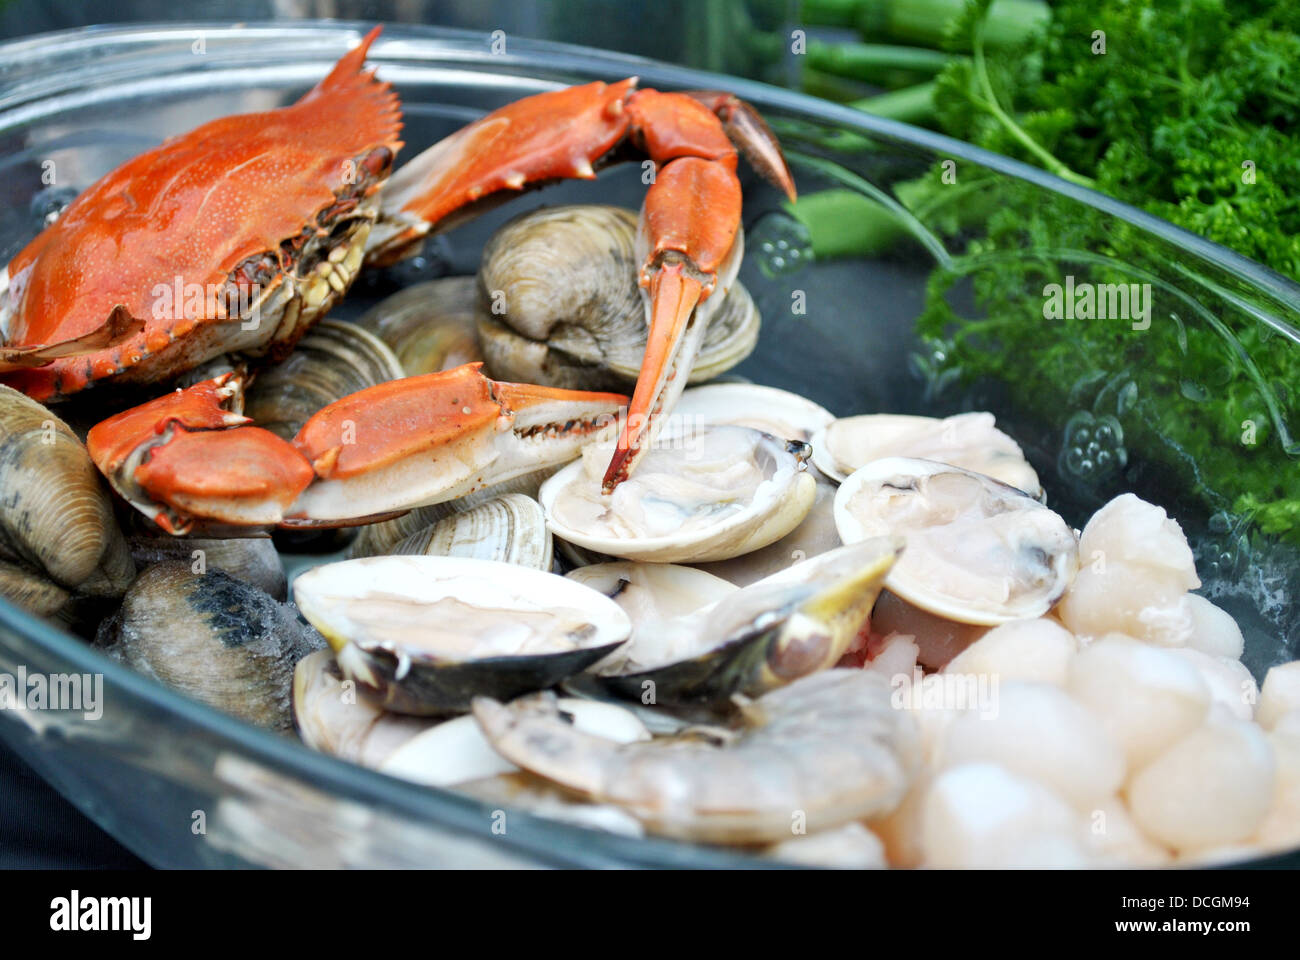 Fresh Seafood in an Glass Bowl Stock Photo